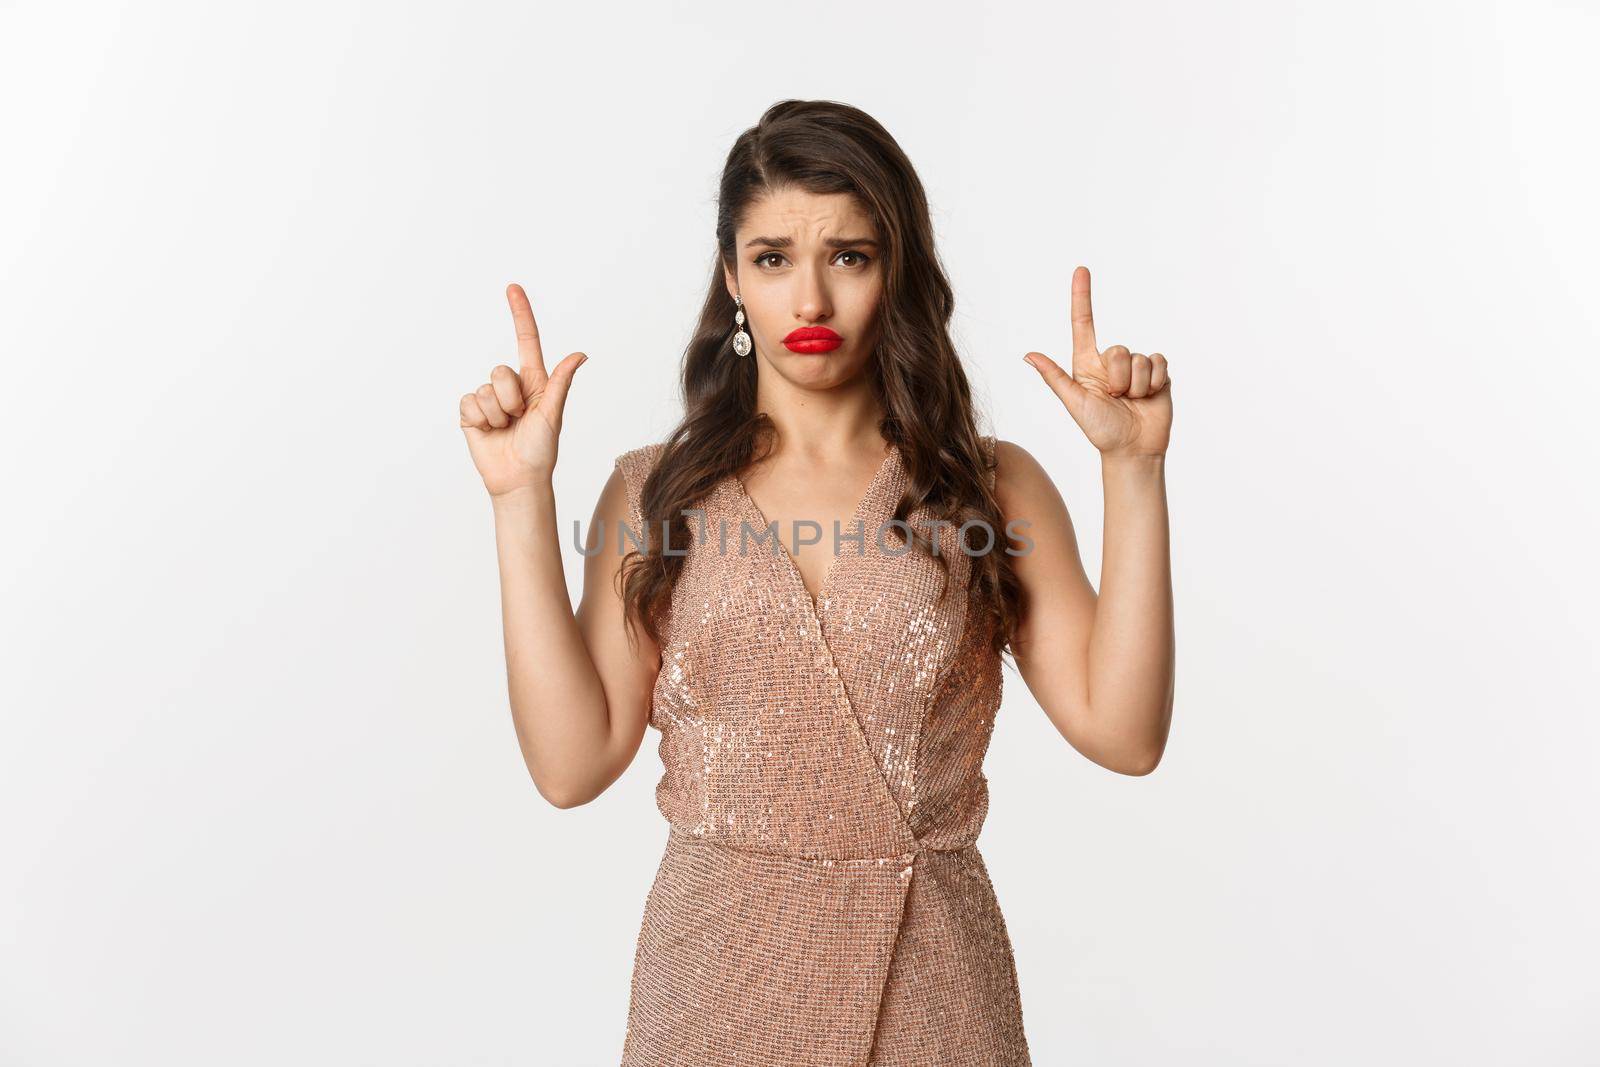 New Year, christmas and celebration concept. Gloomy and sad glamour girl in party dress pointing fingers up, sulking and crying about something, standing over white background.